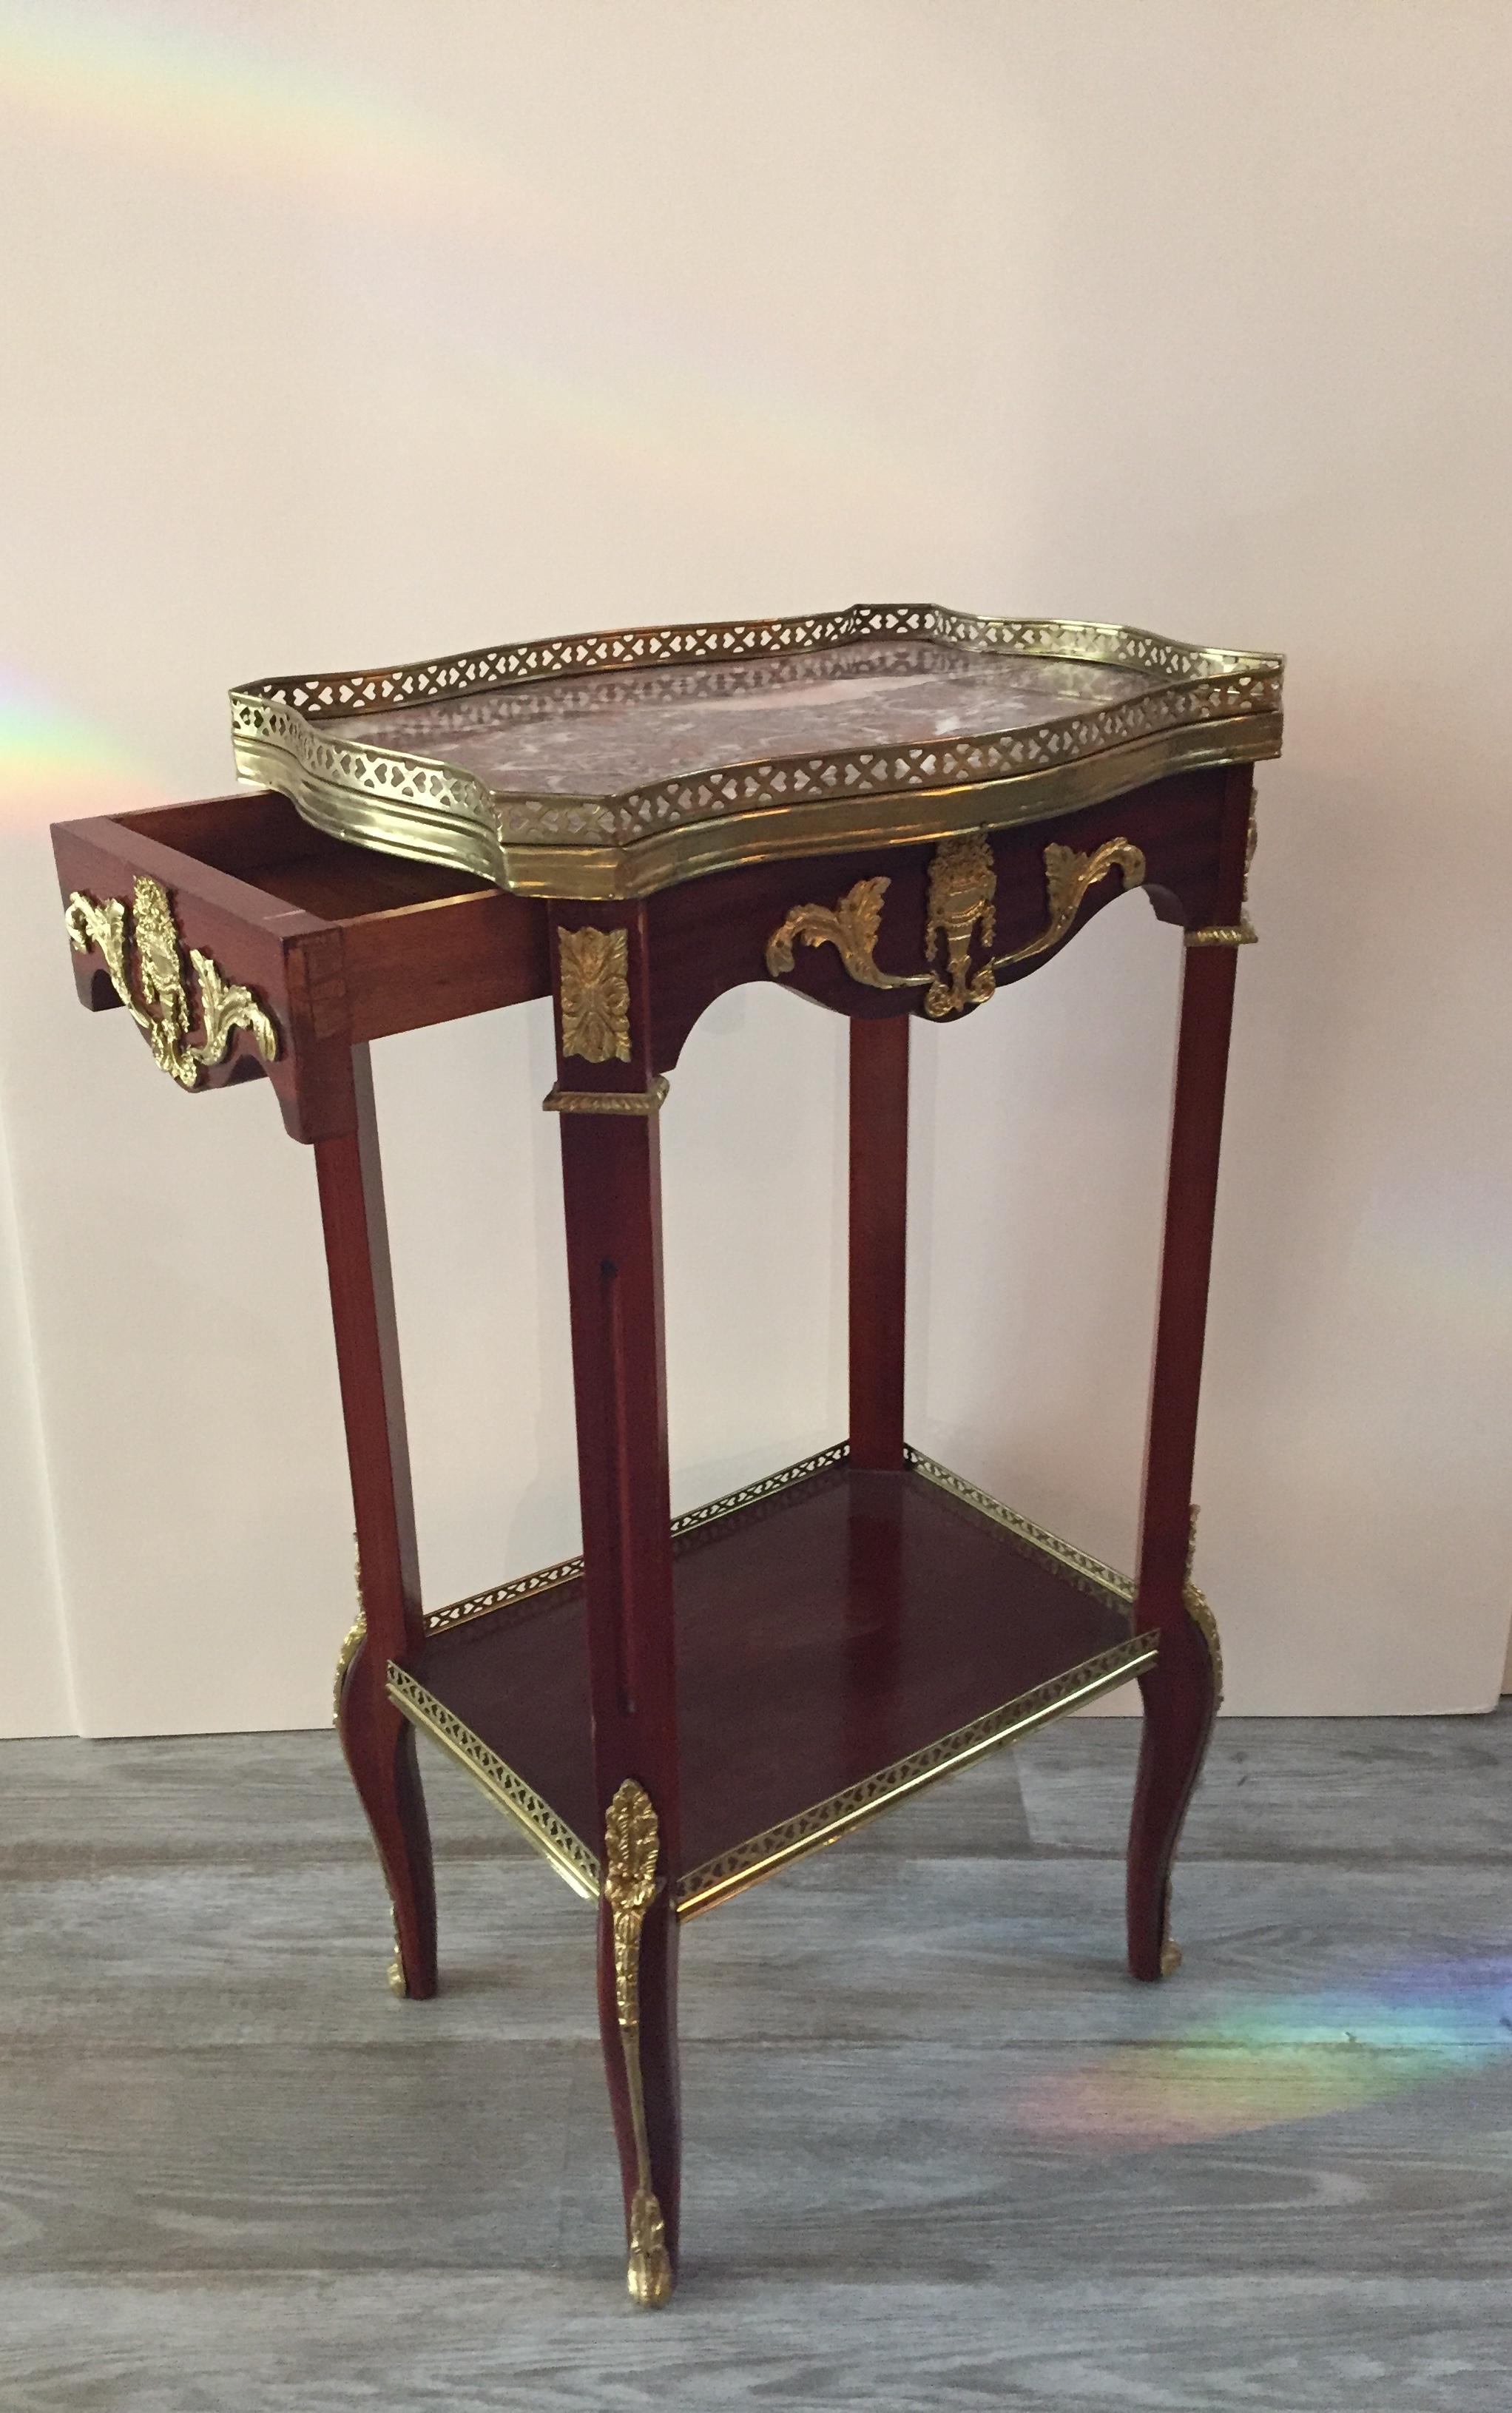 Louis XVI style fancy mahogany side table having ornate ormolu decoration , rouge and cream scalloped marble top with brass gallery, single drawer, lower tier with brass gallery and pretty feet that have cabriole shape.